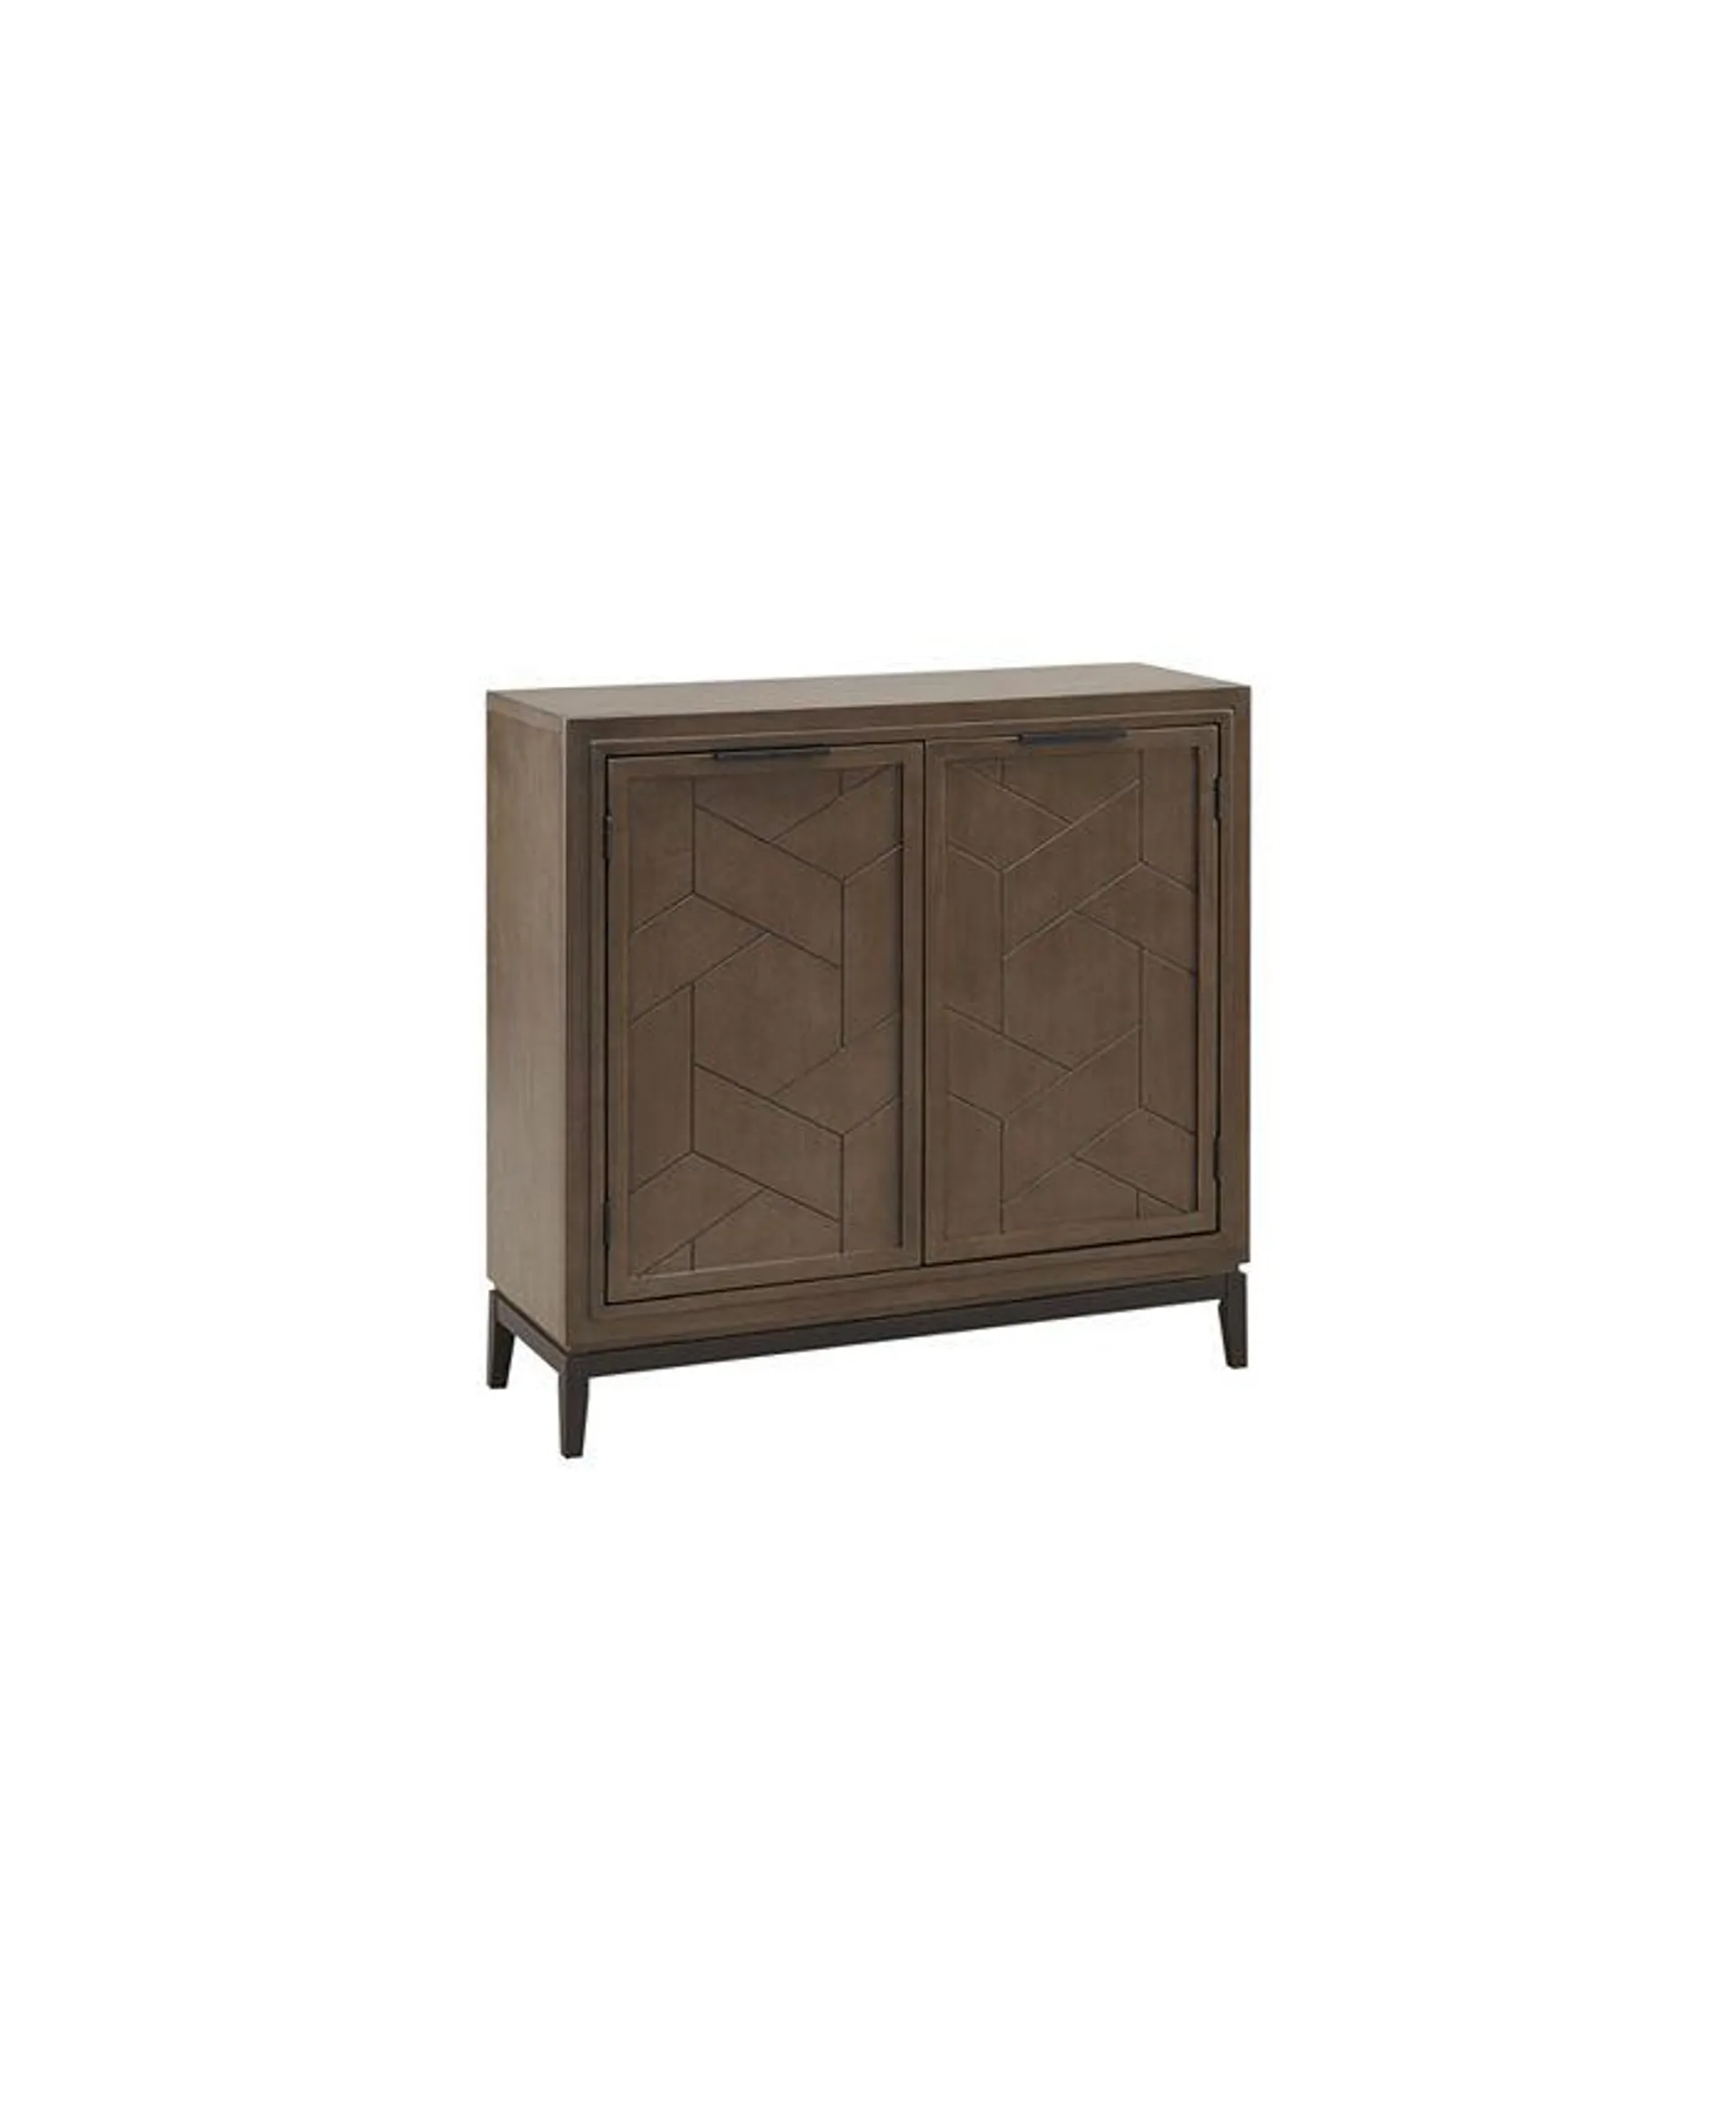 Emmett Mixed Metal and Wood Foyer Cabinet